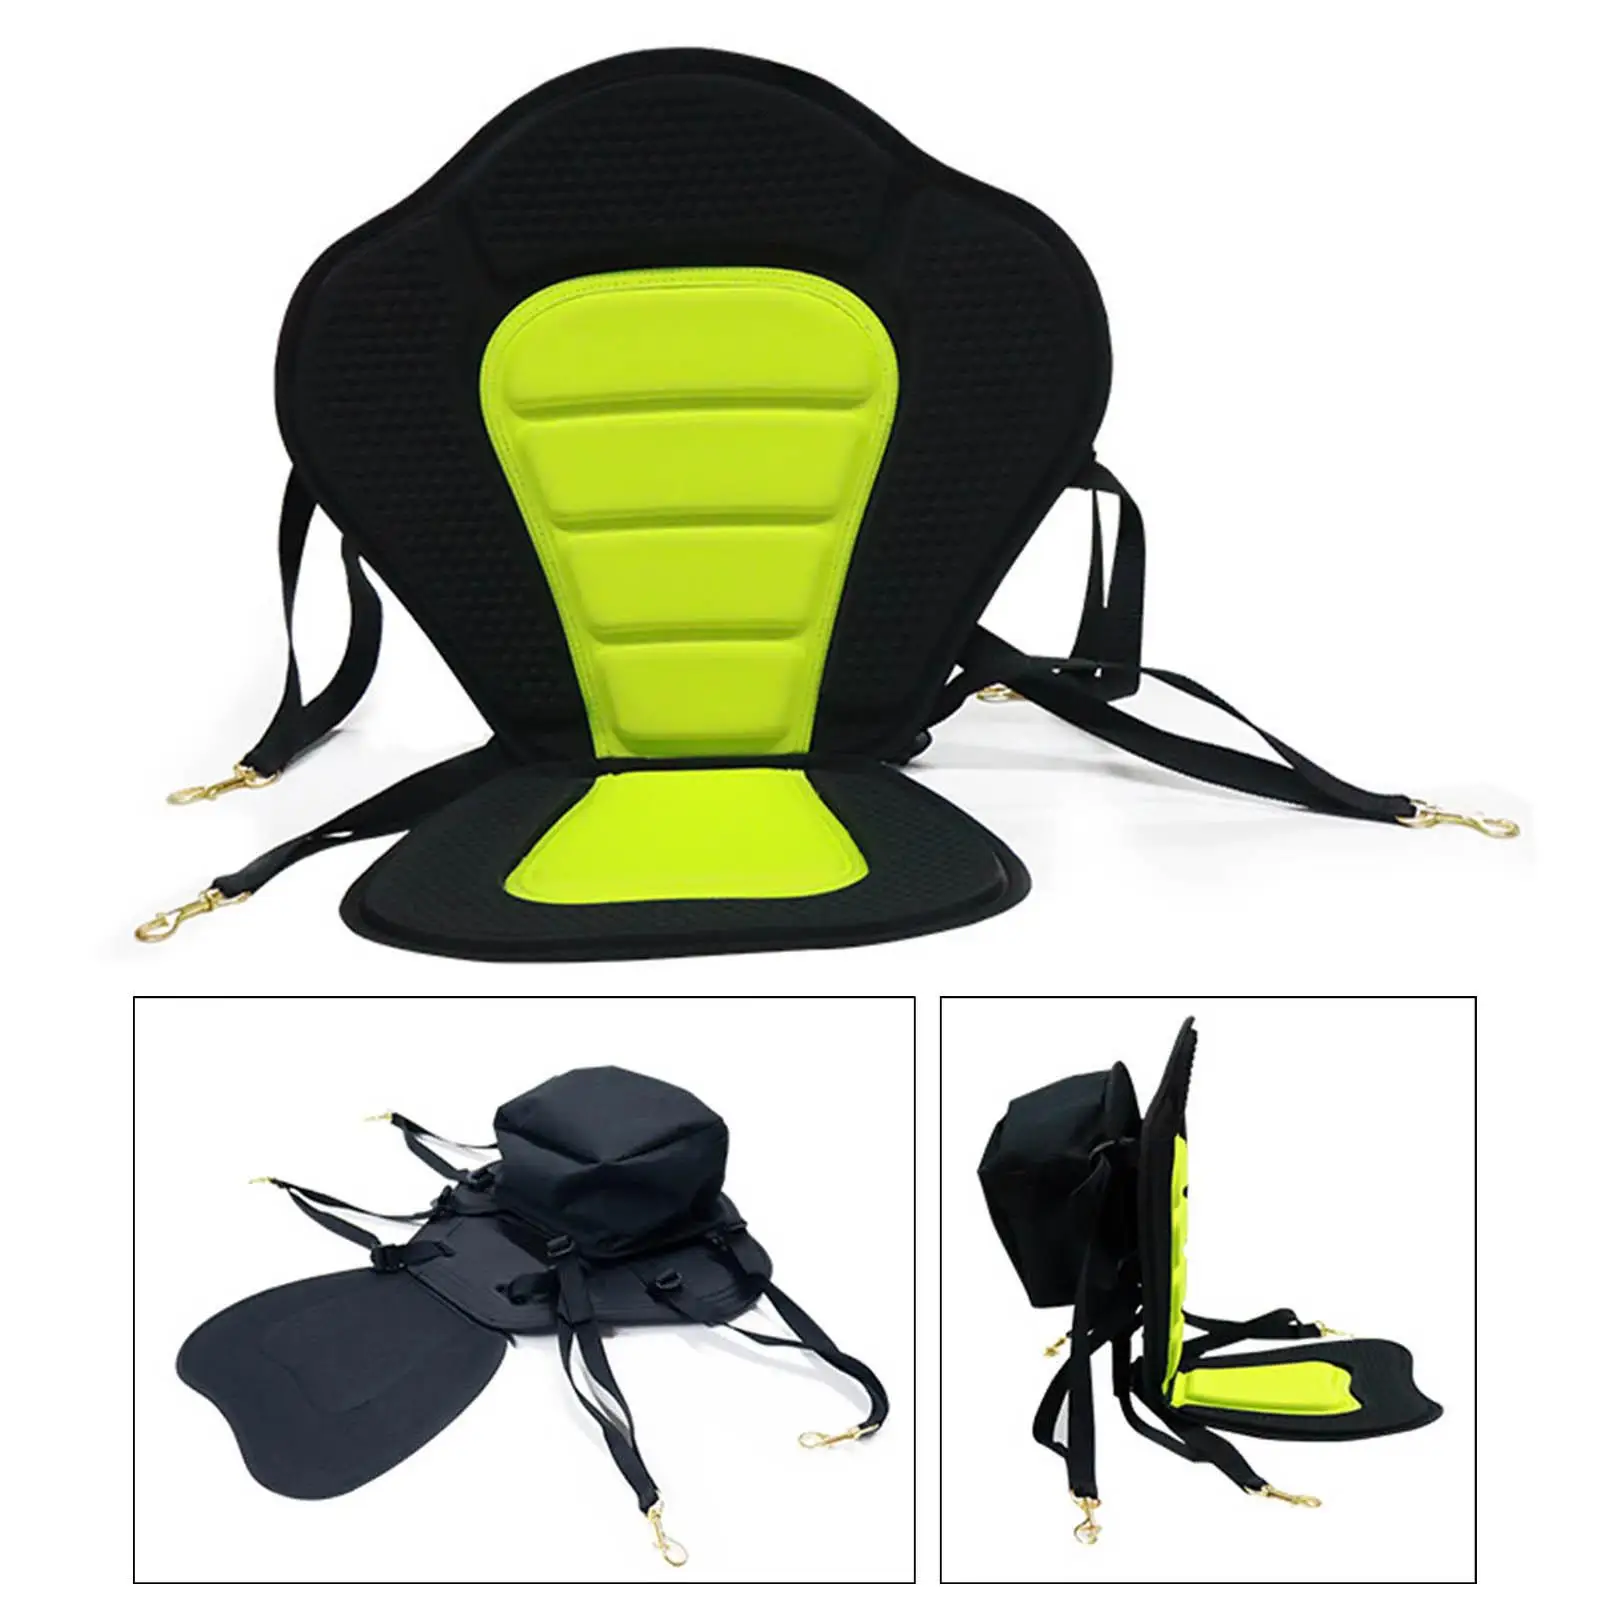 Detachable Kayak Seat, Heavy Duty Easy to Install for Kayaks Boat Rafting Fishing